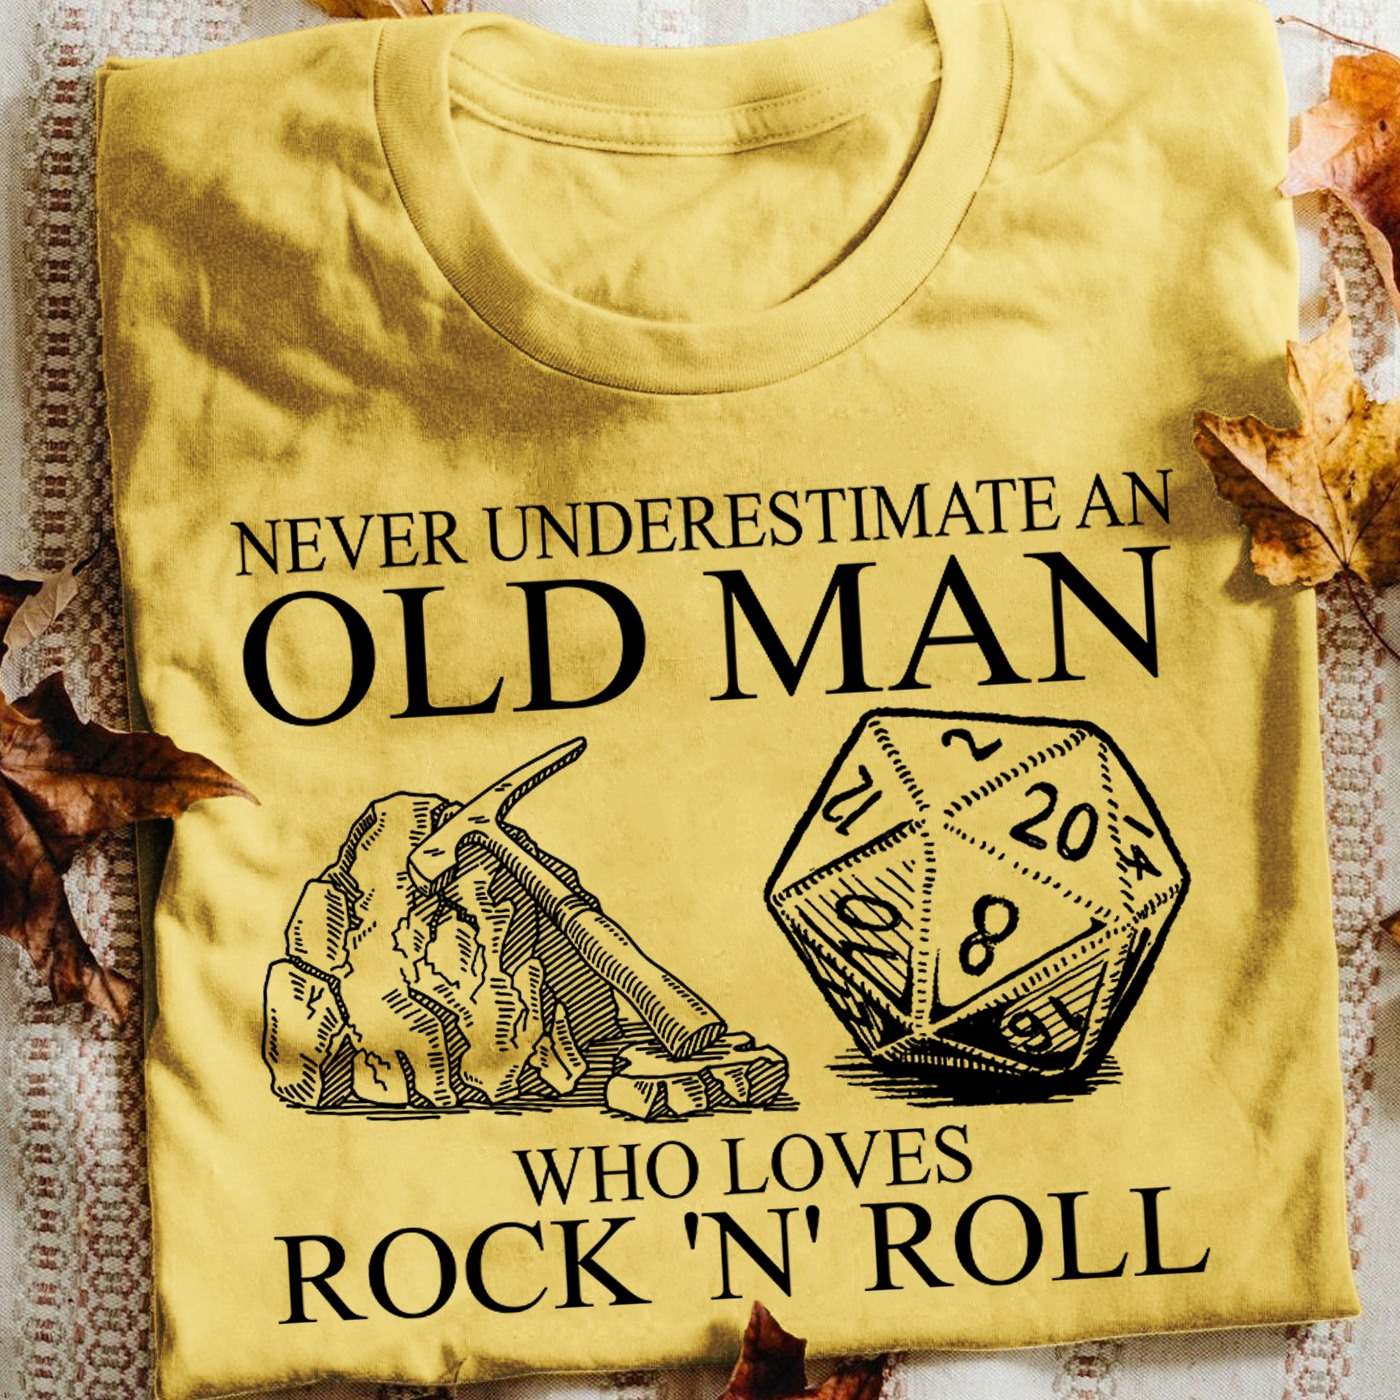 Never underestimate an old man who loves rock 'n' roll - D&d game